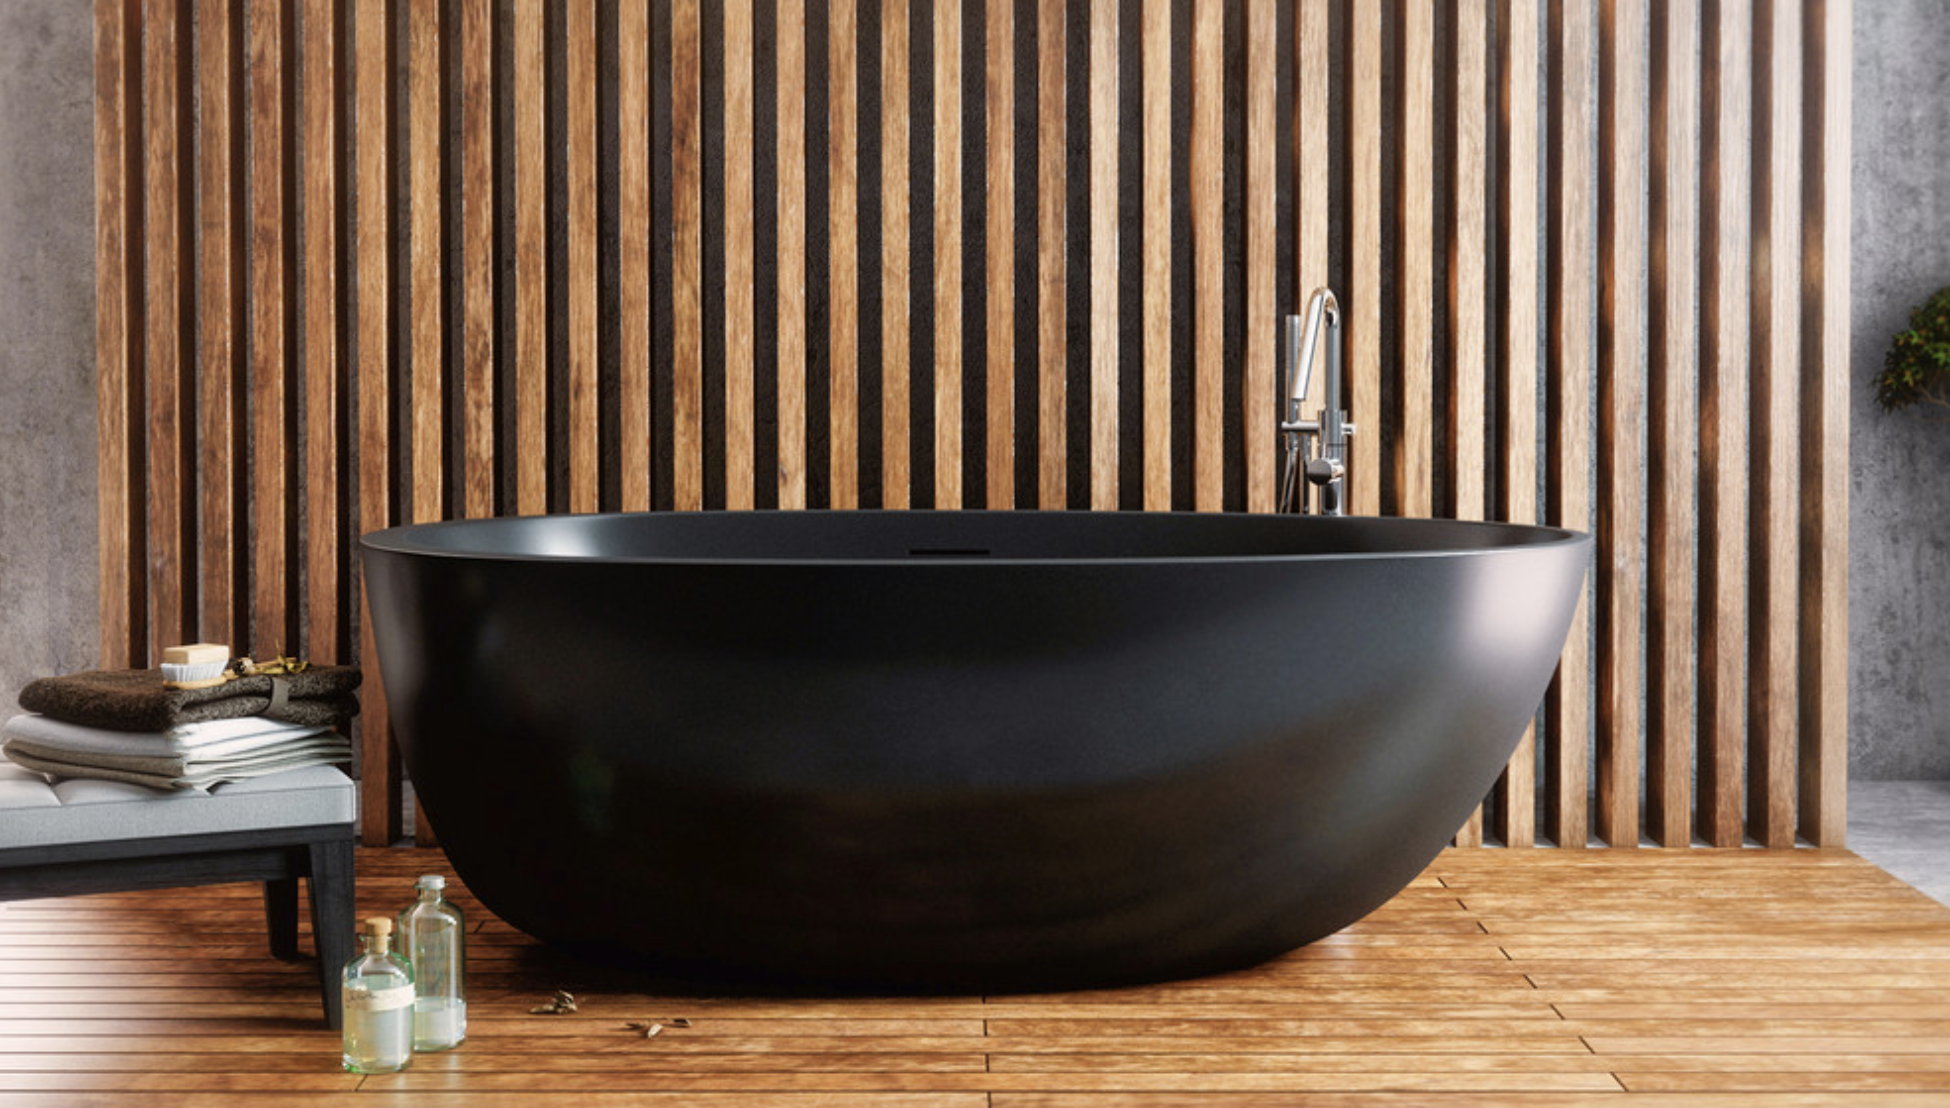 Is a Freestanding Tub Right for Me?